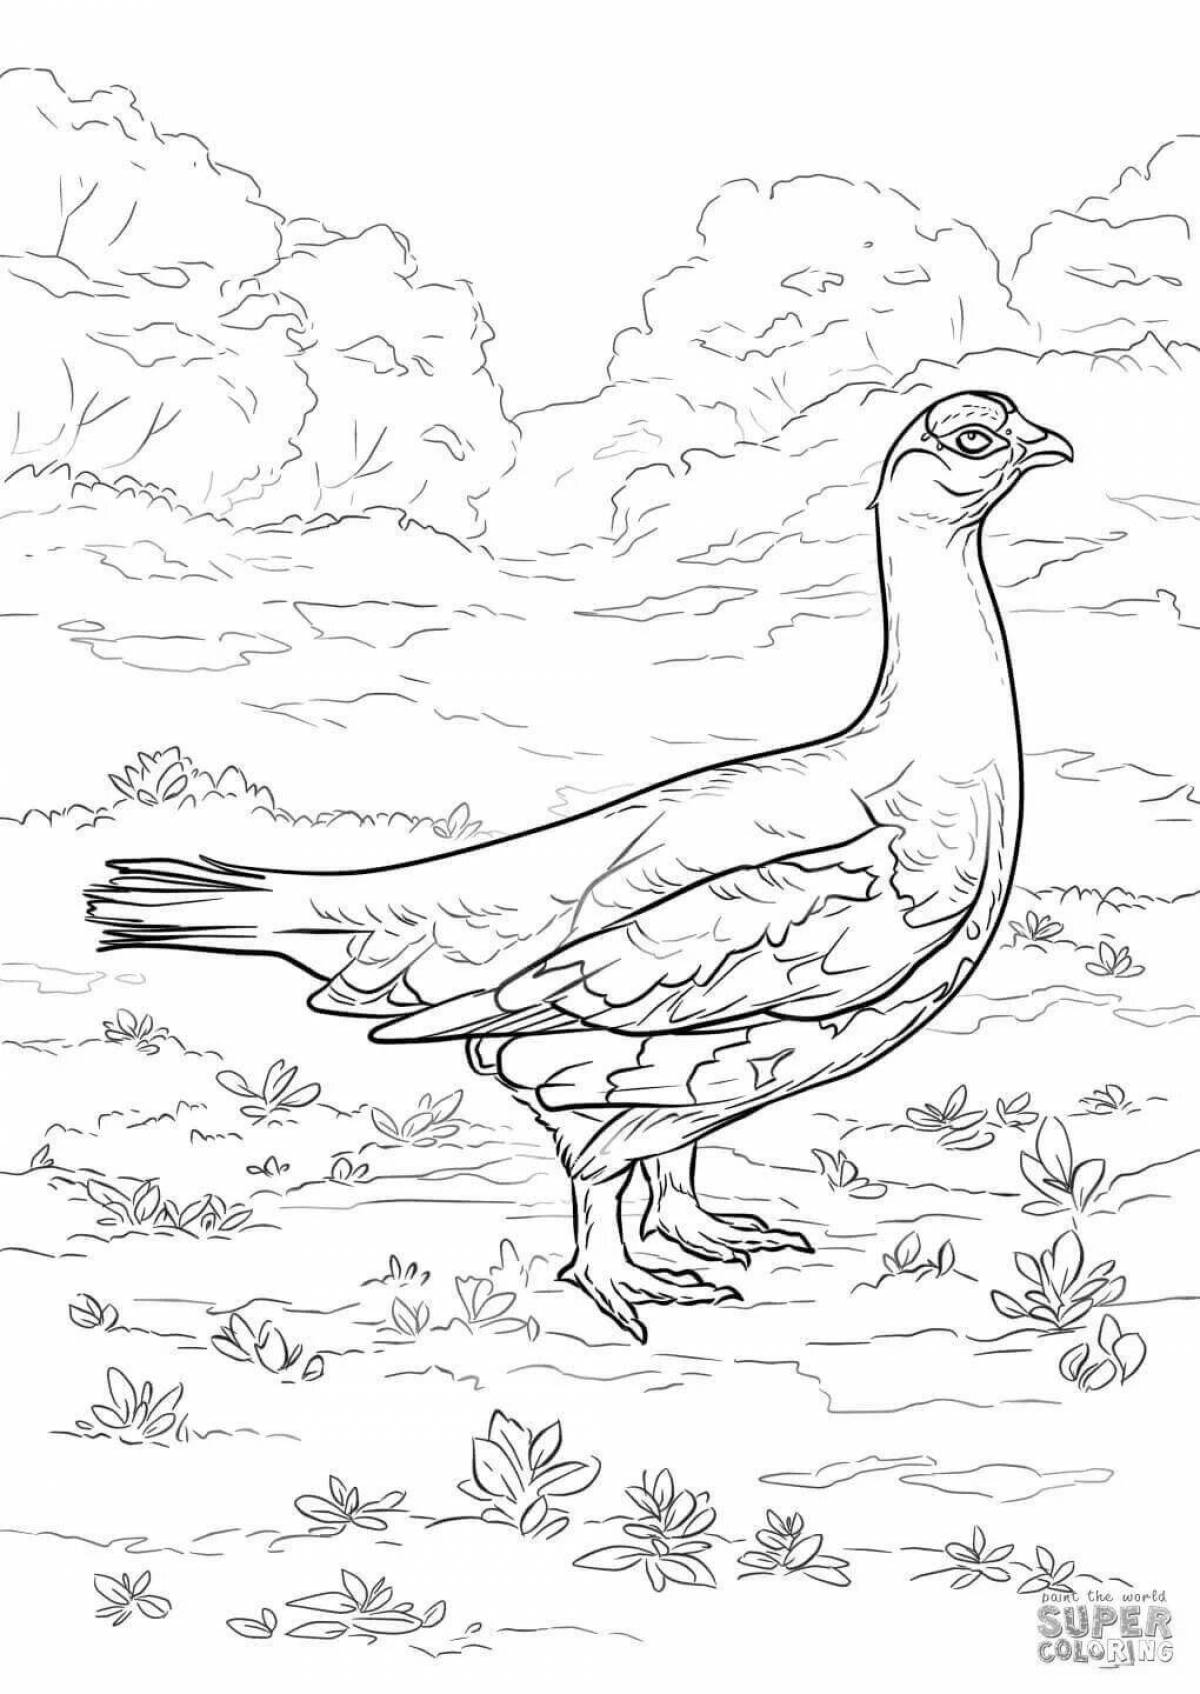 Adorable grouse coloring book for kids